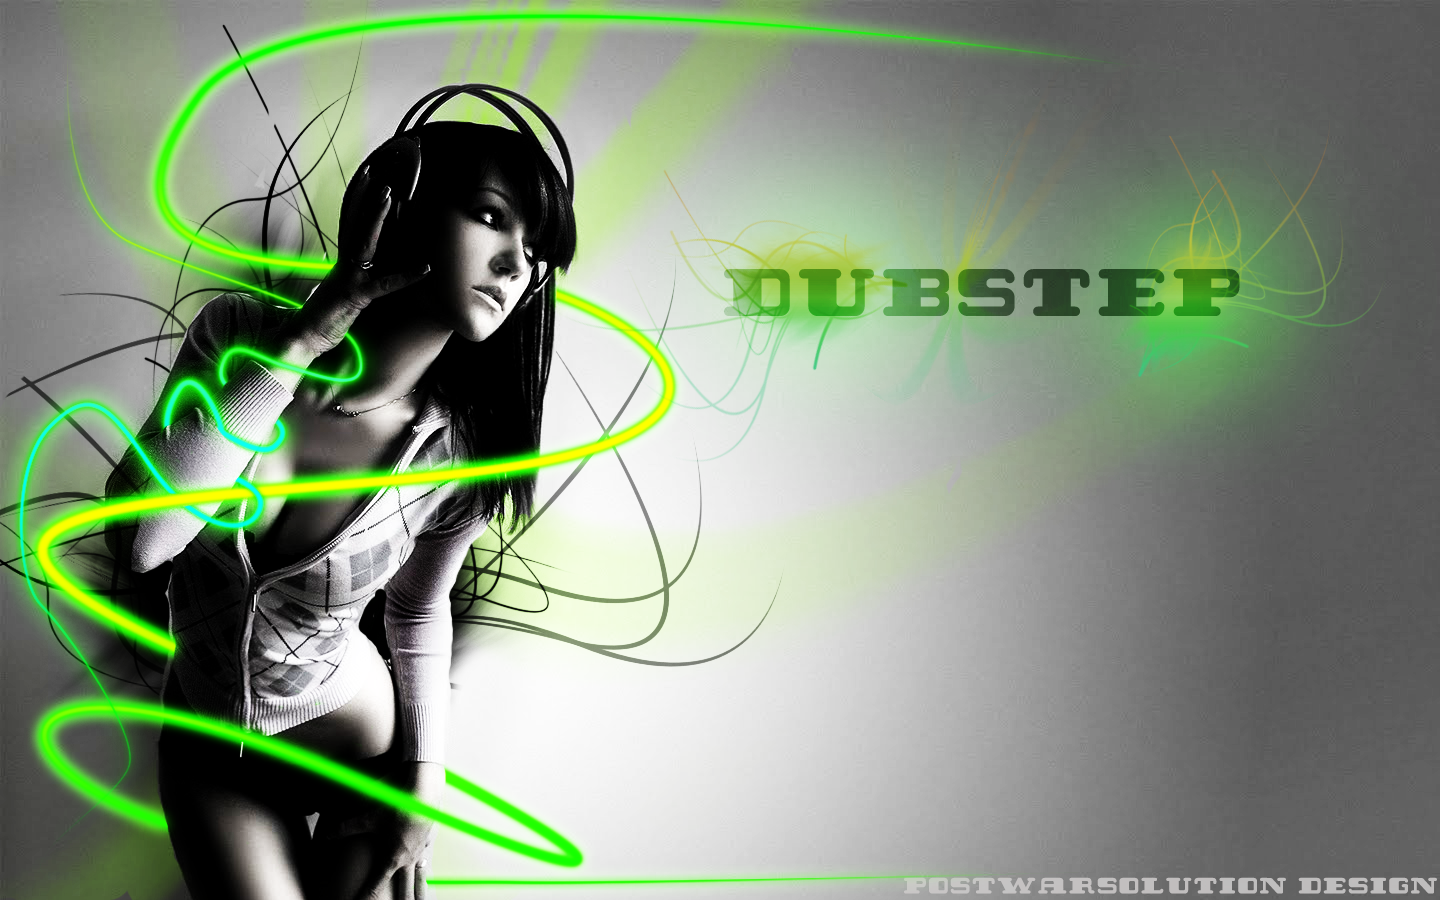 Top 10 best filthy brutal dubstep drops and tracks (songs featured ...